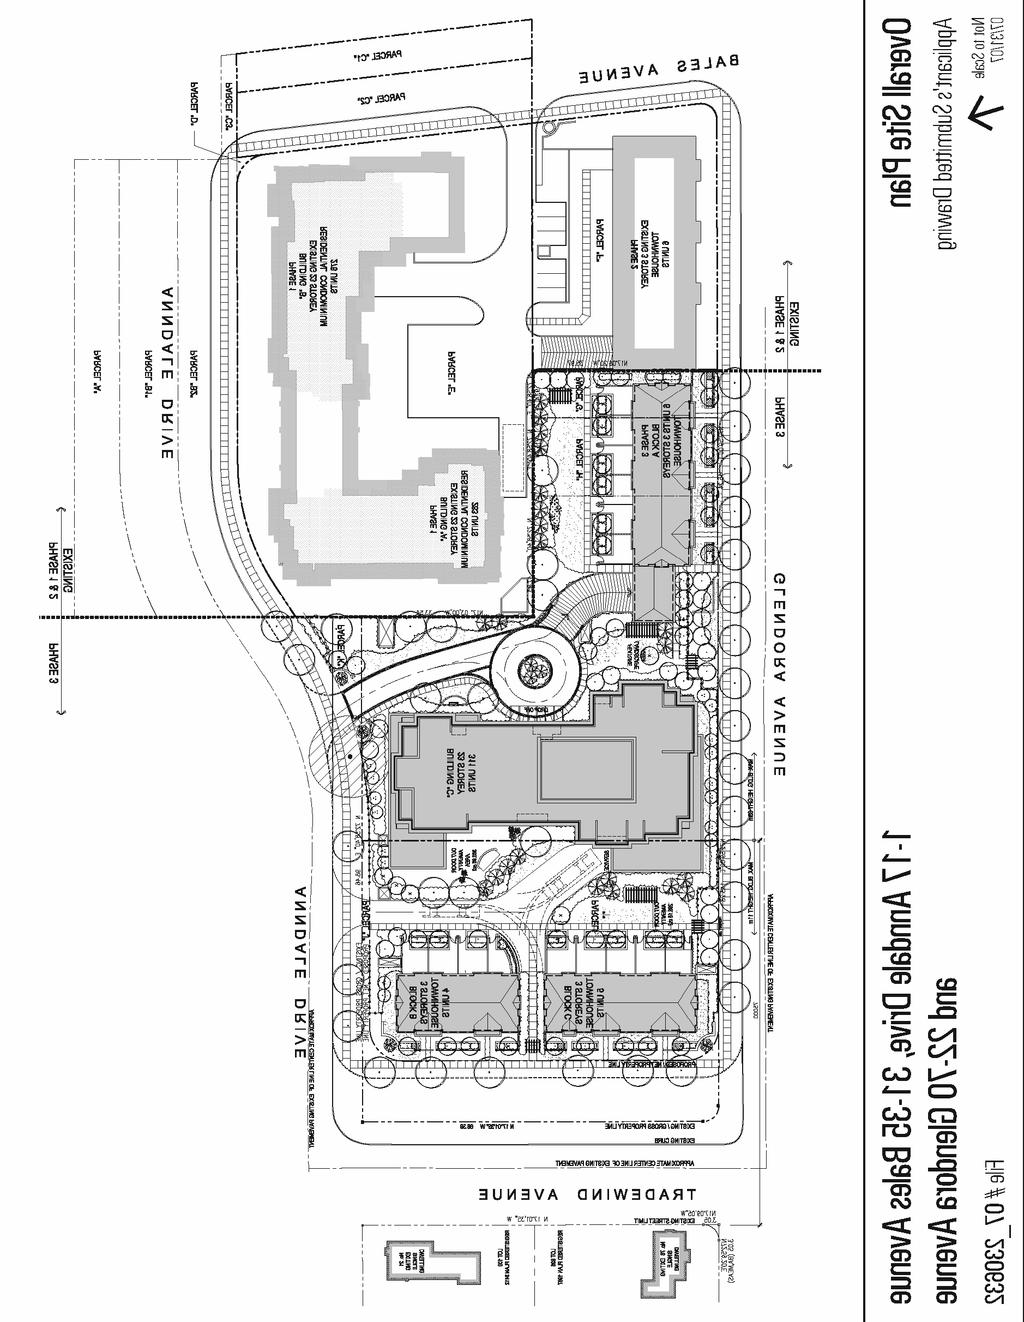 Attachment 1a: Overall Site Plan Staff report for action